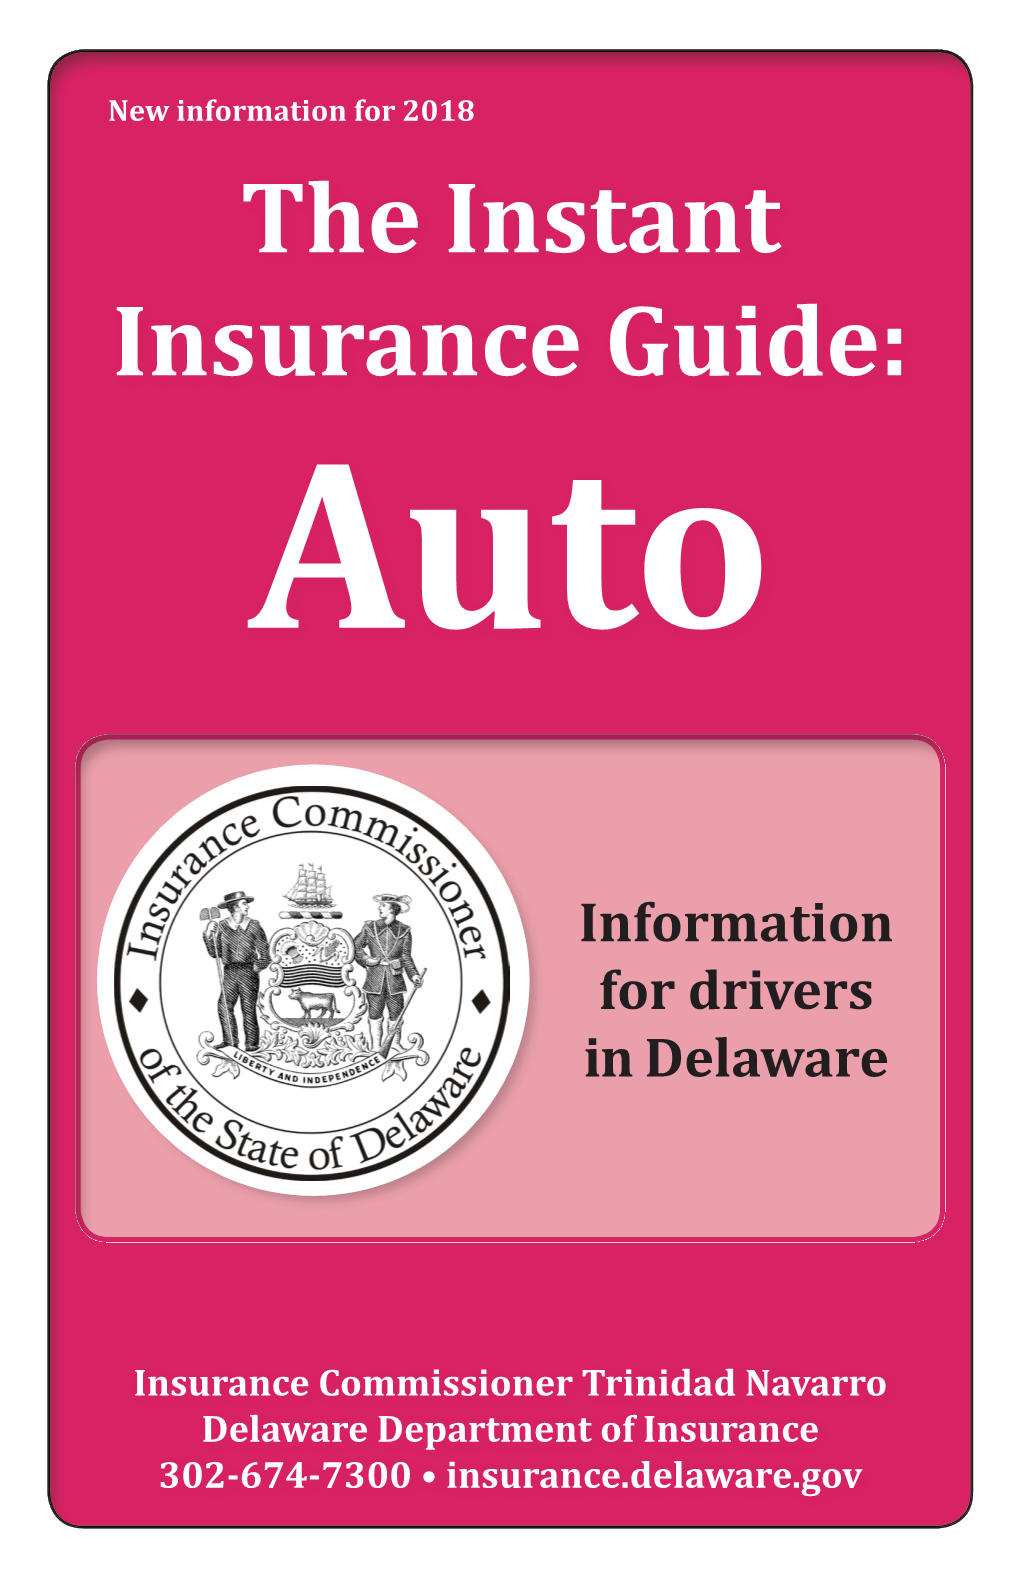 Auto Insurance So That You Can Make Informed Decisions When Purchasing Insurance for Cars, Trucks and Motorcycles